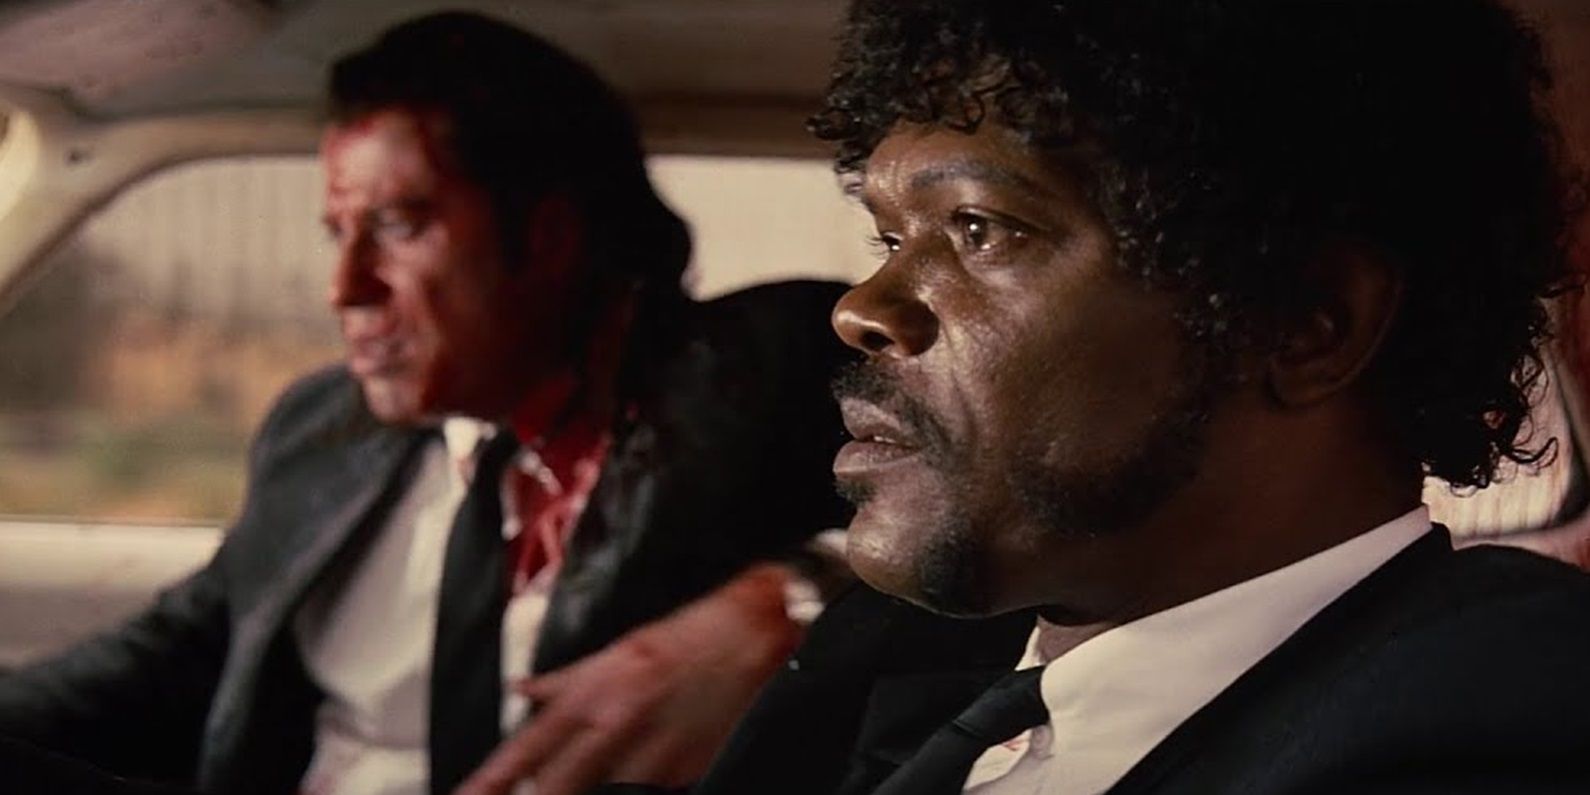 Vincent and Jules covered in blood in Pulp Fiction.